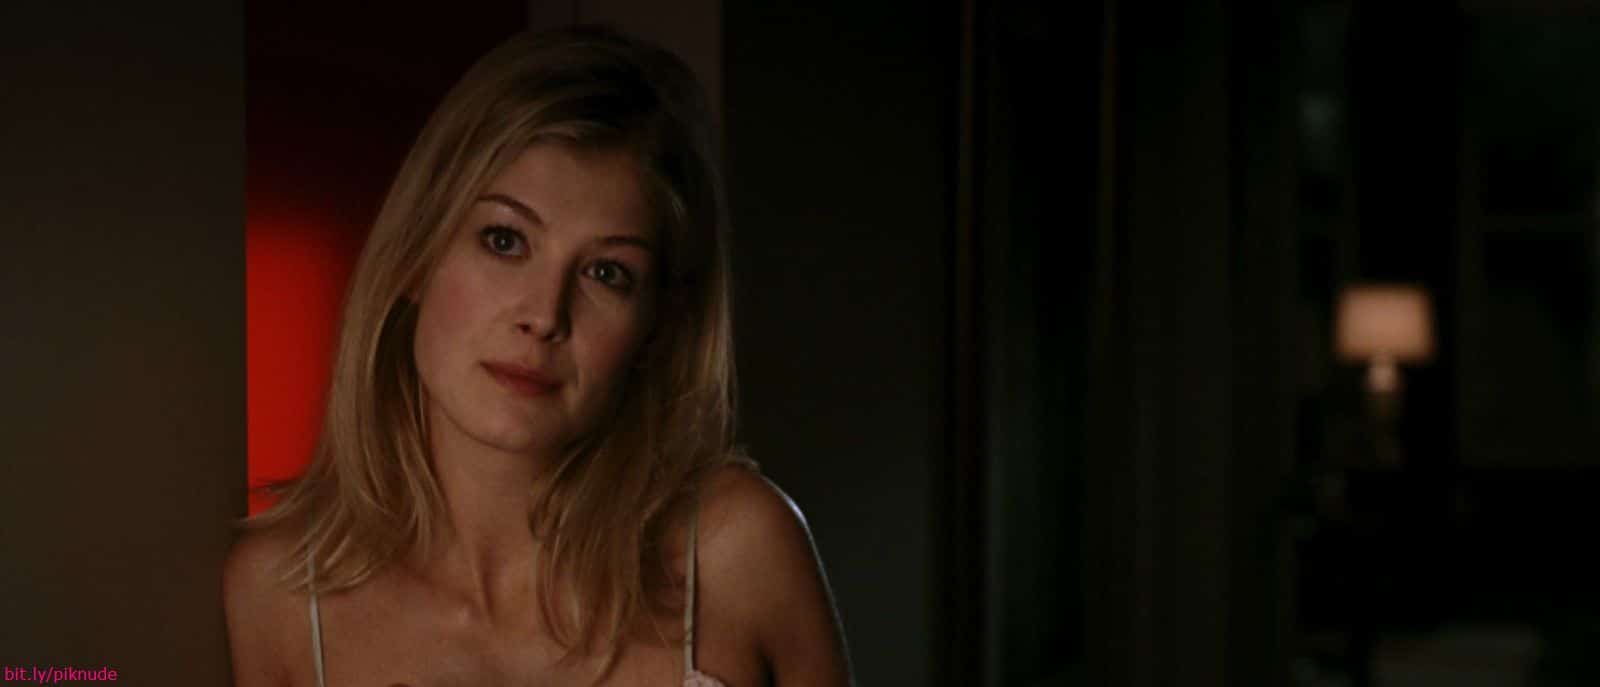 Rosamund Pike Nude Finally You Get To See Her Naked Pics The Best Porn Website